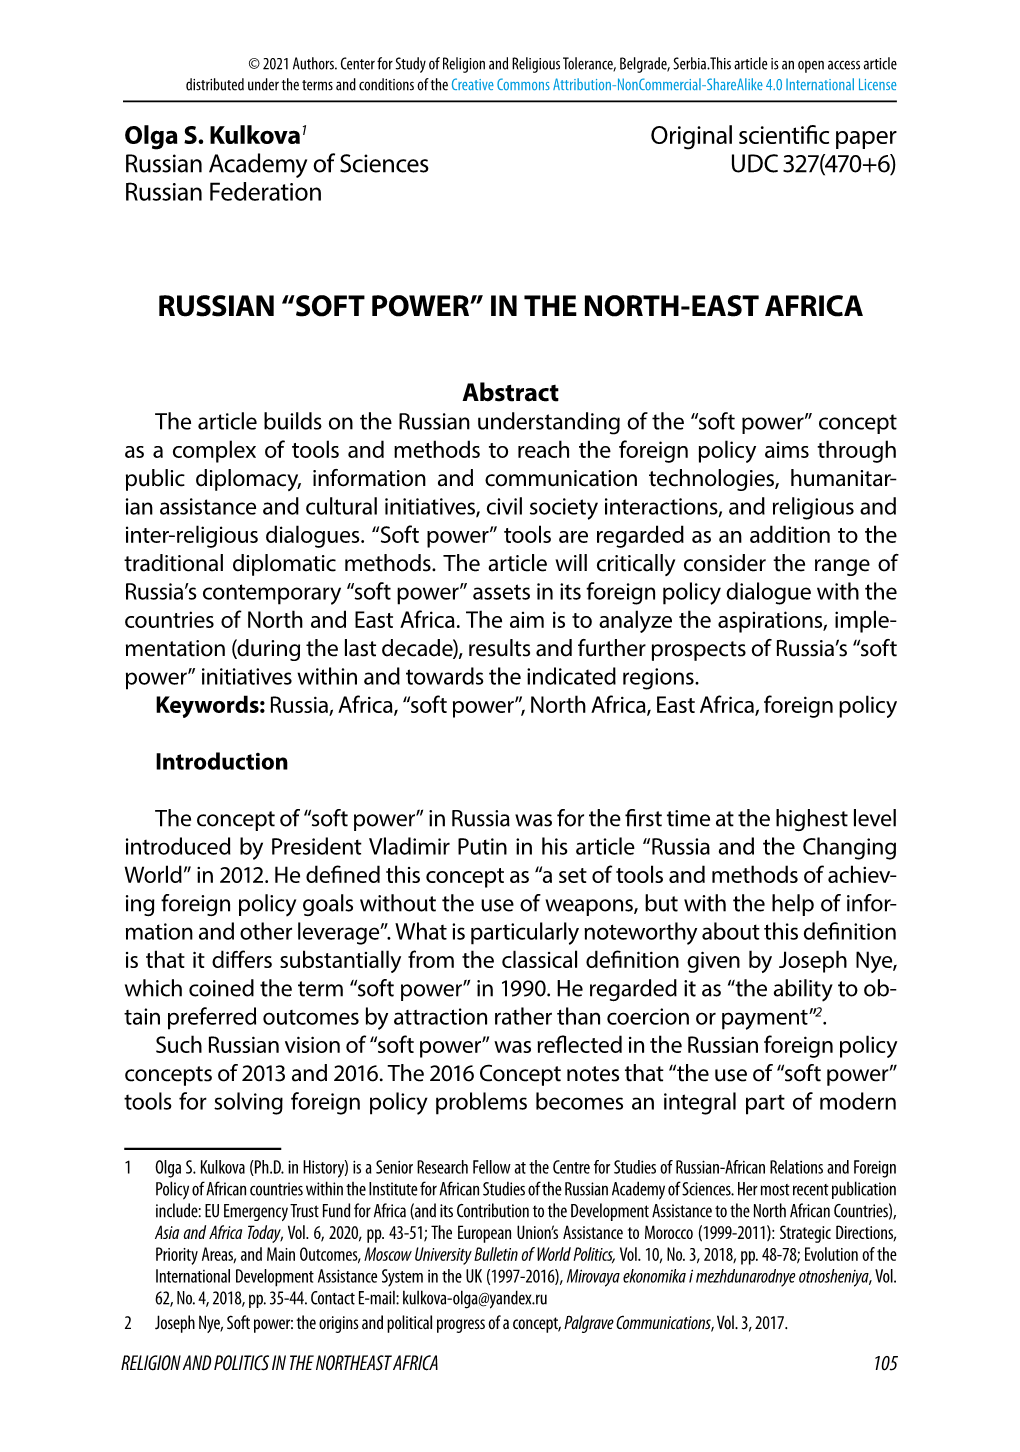 Soft Power” in the North-East Africa